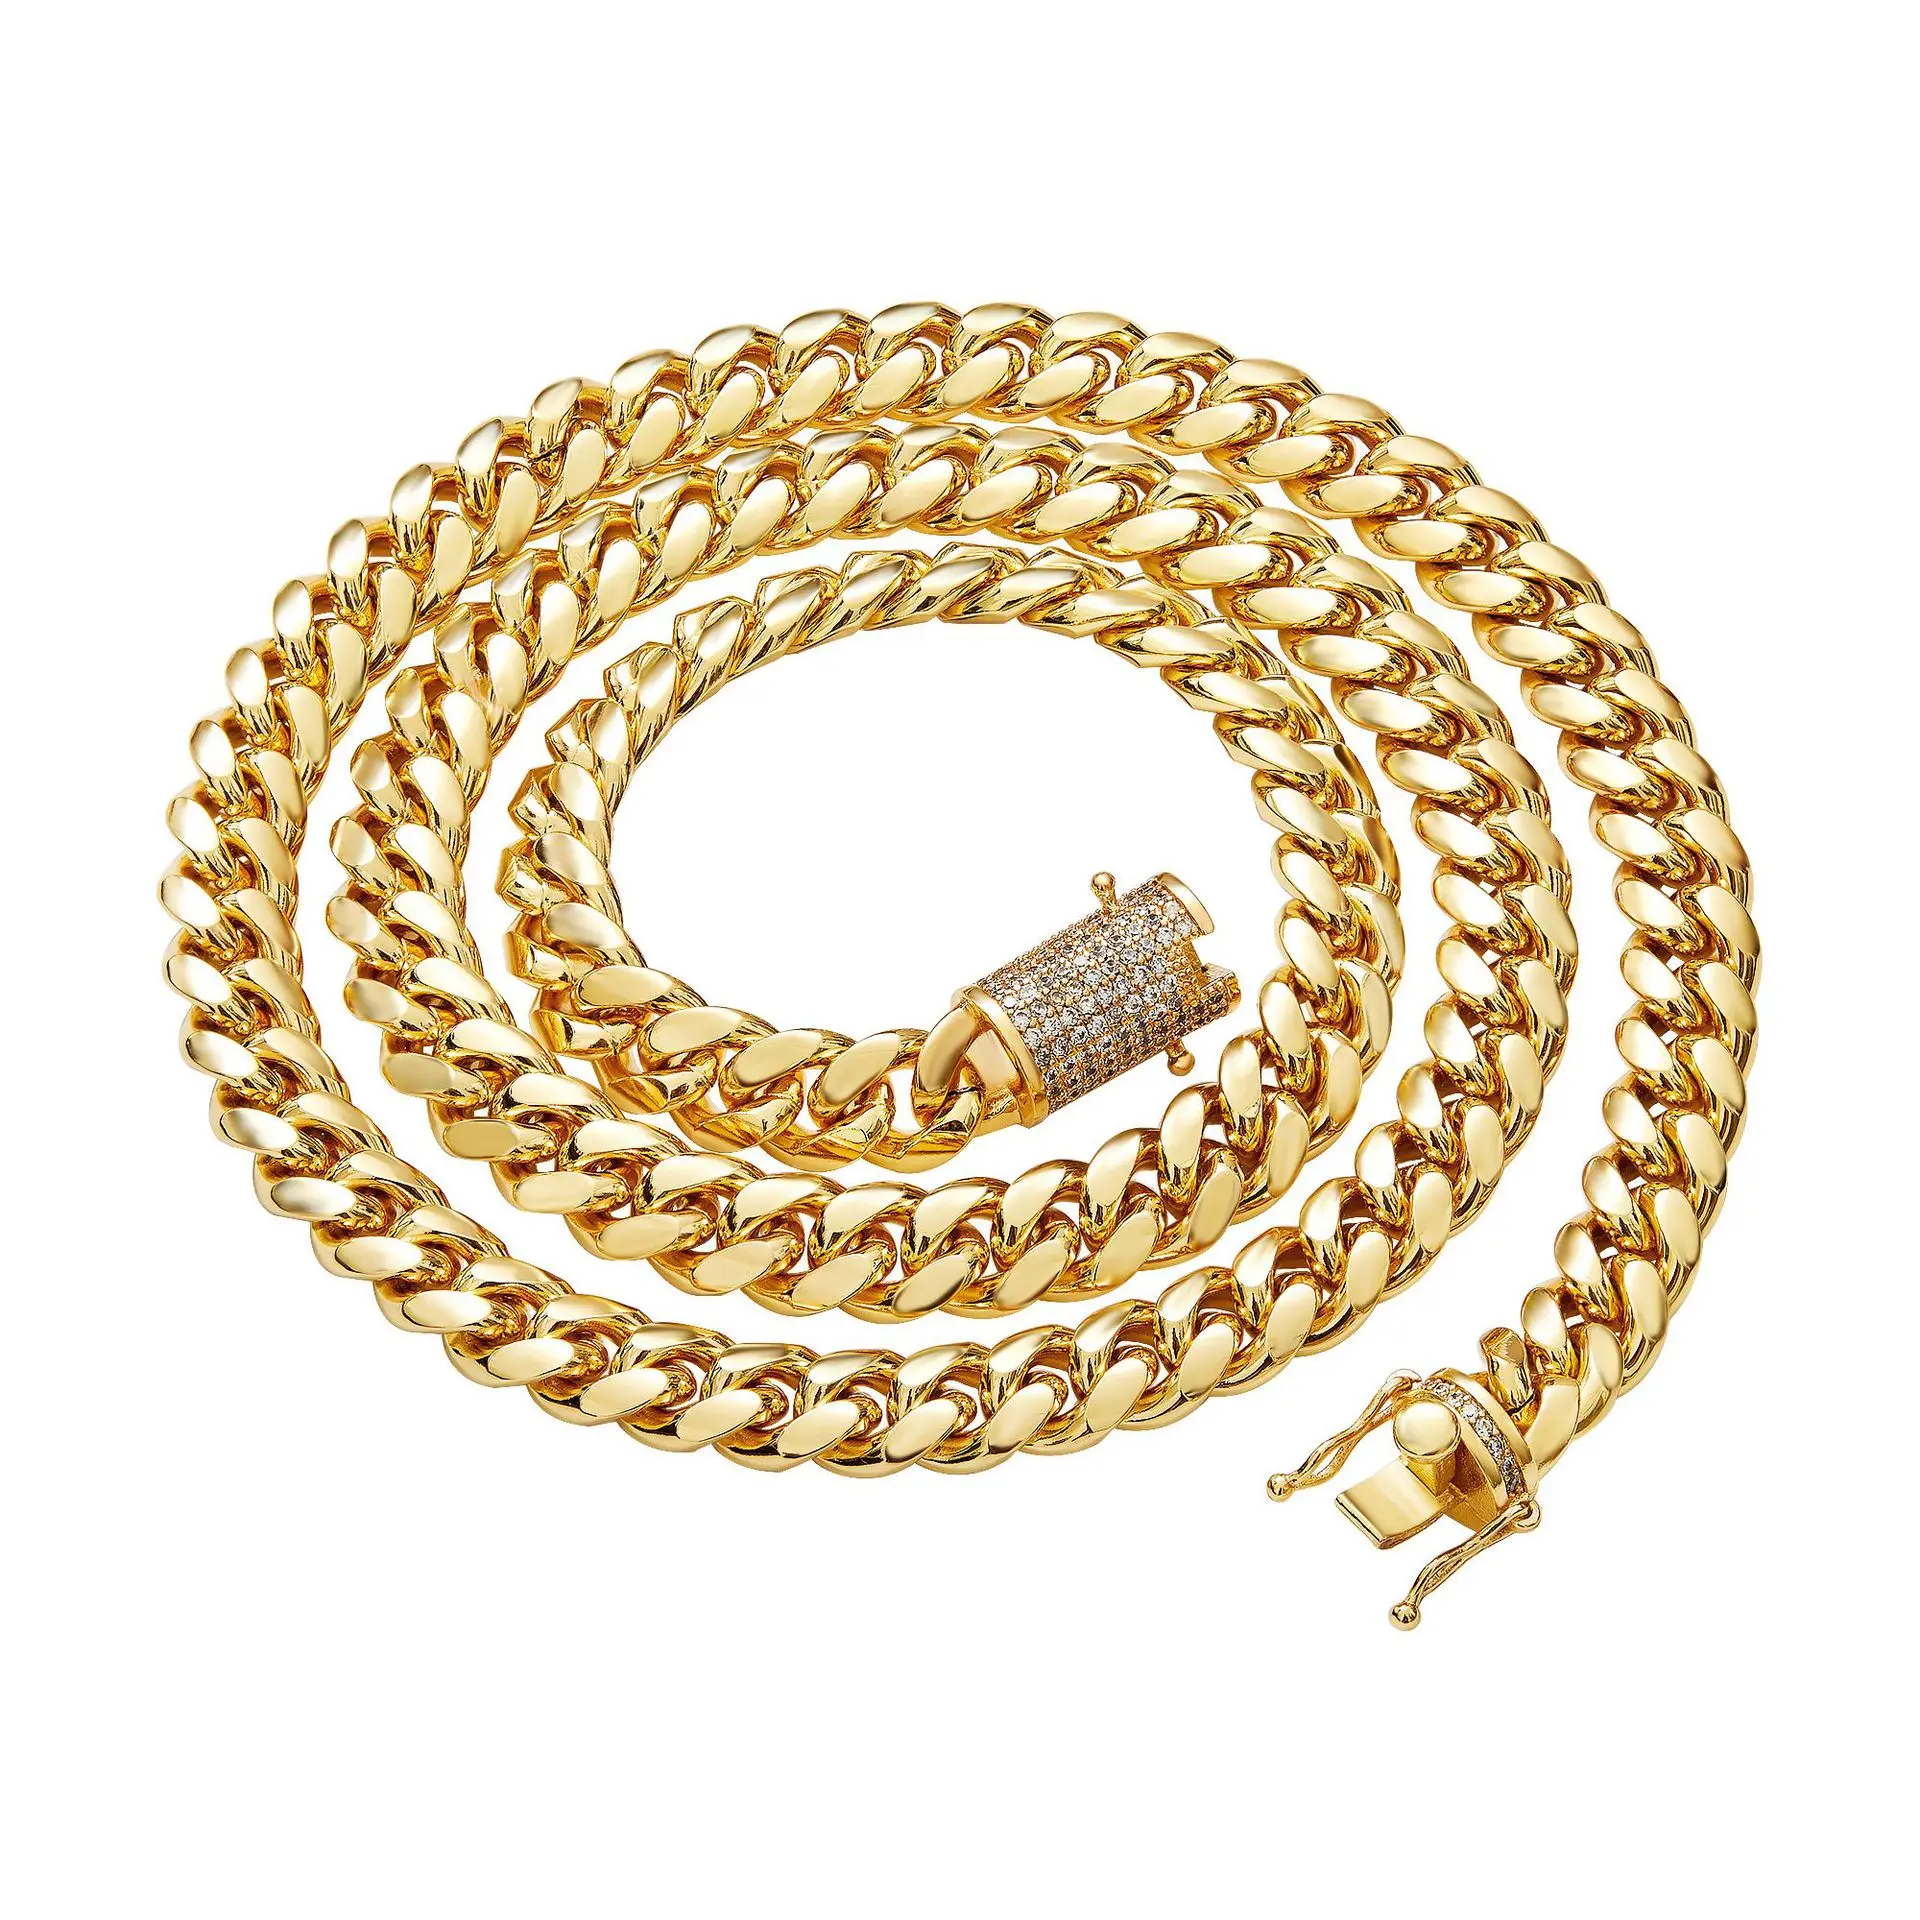 

Hot Selling Hips Hops Jewelry Thick 10mm Solid 18K Gold Cuban Chain Iced Out Stainless Steel Cuban Link Men's Necklace